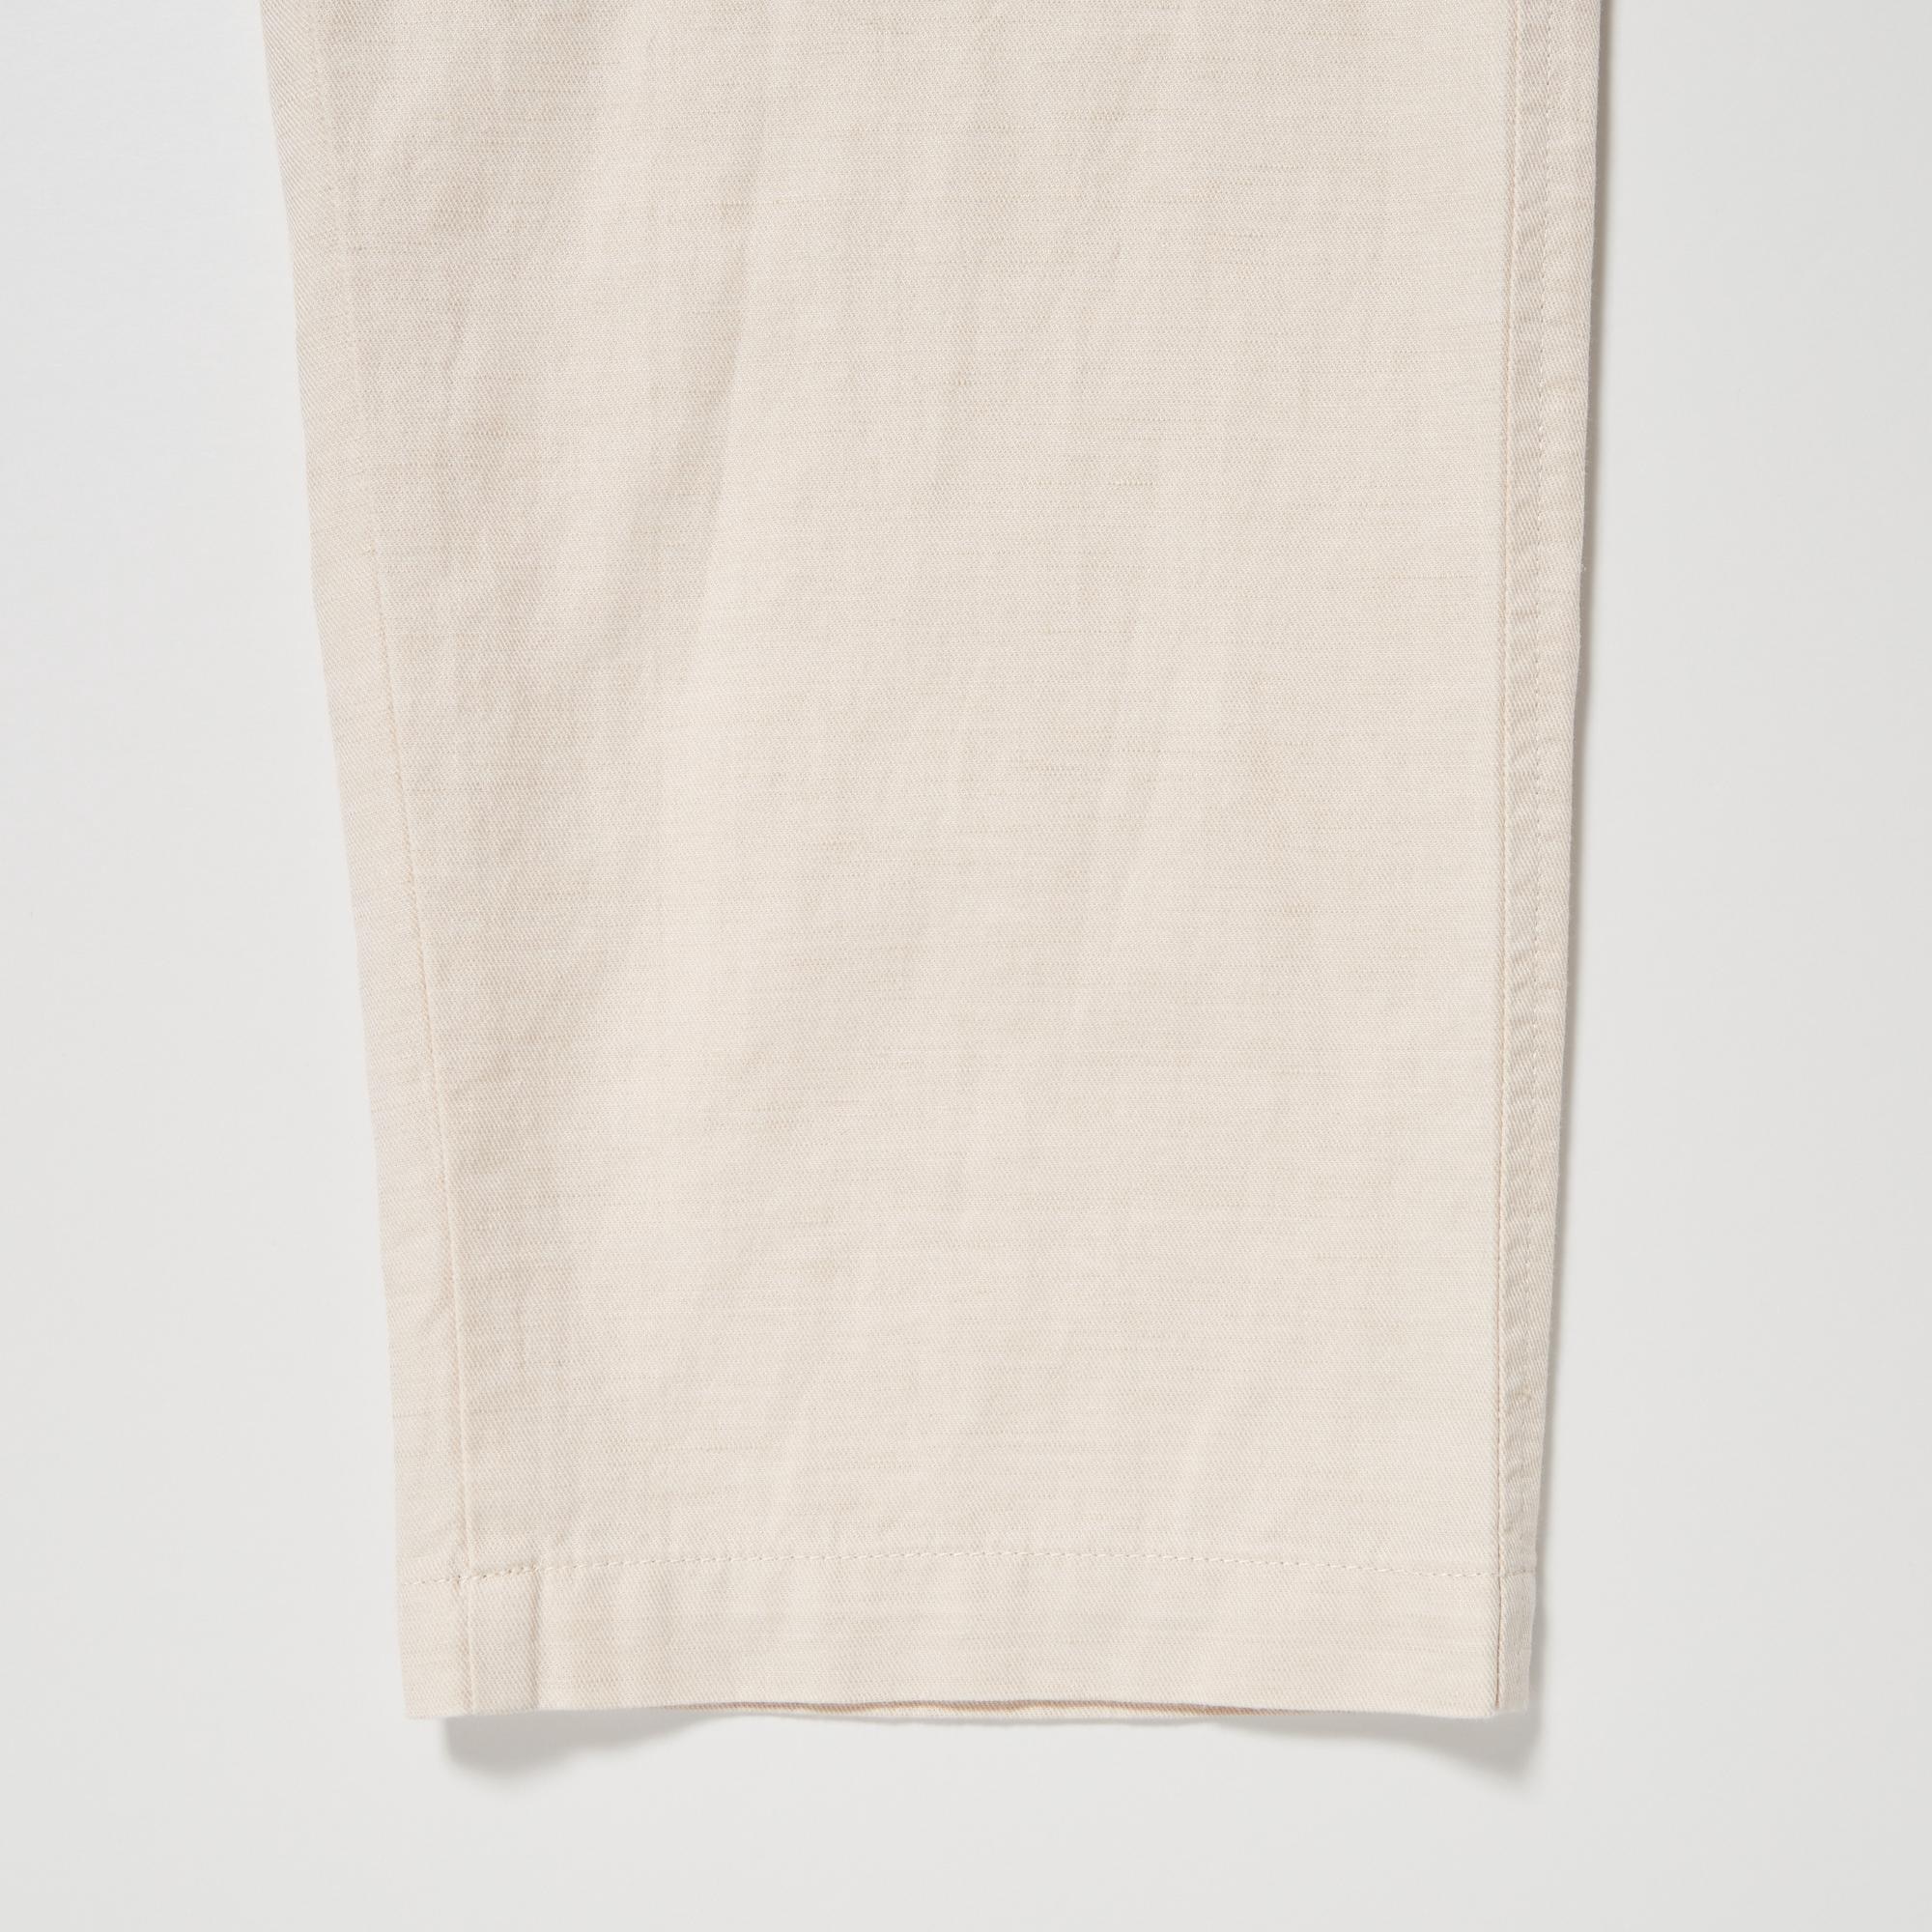 Linen Blend Relaxed Fit Trousers | UNIQLO EU